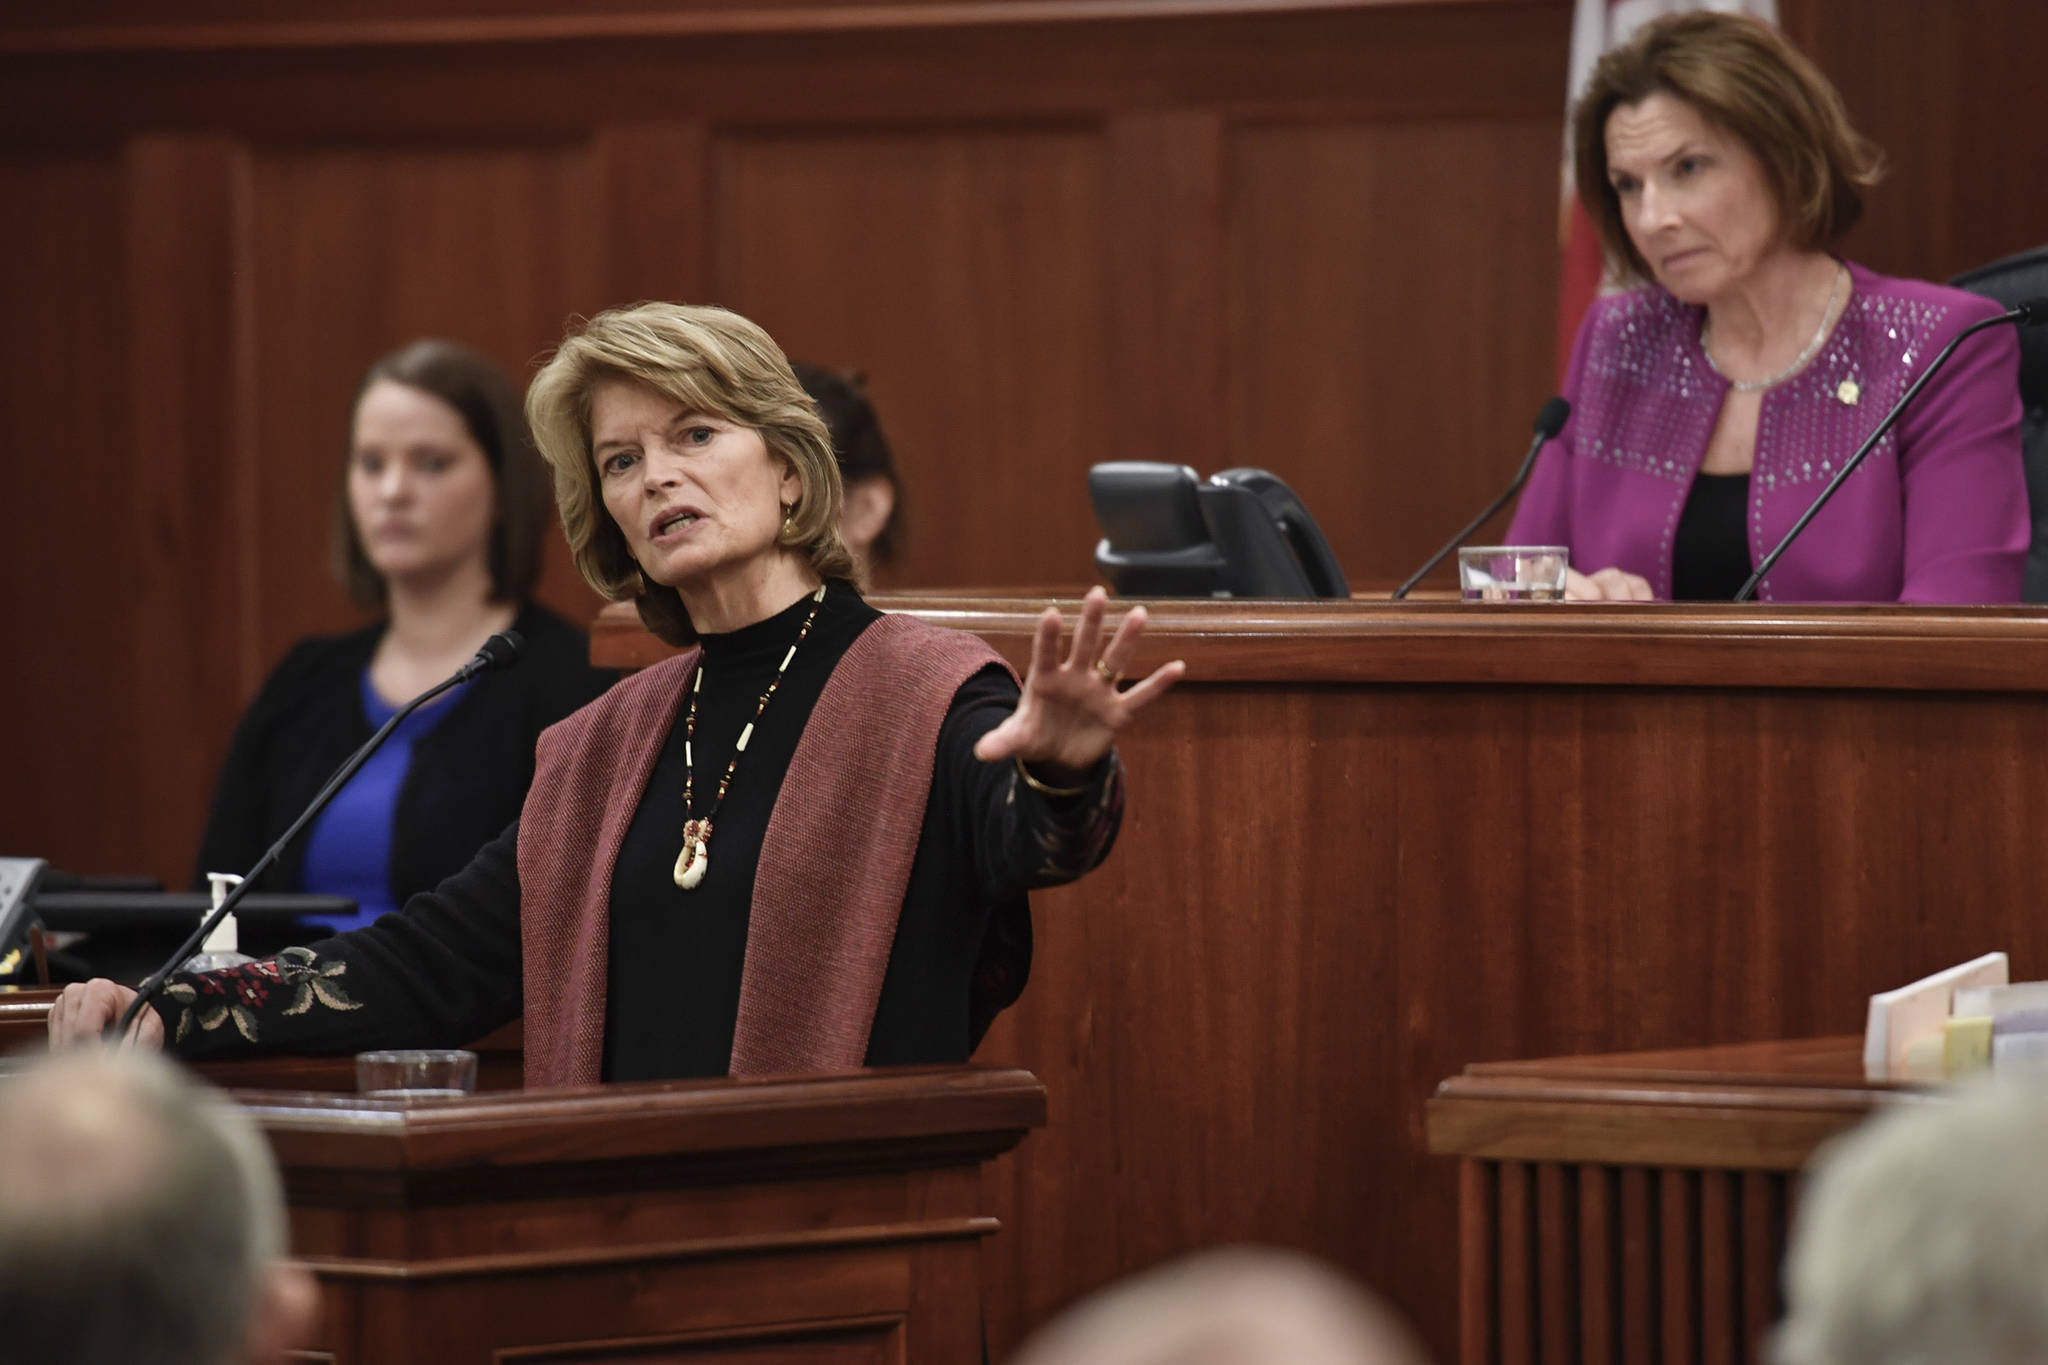 Sen. Murkowski: Lands package will deliver real benefits for Alaskans, all Americans